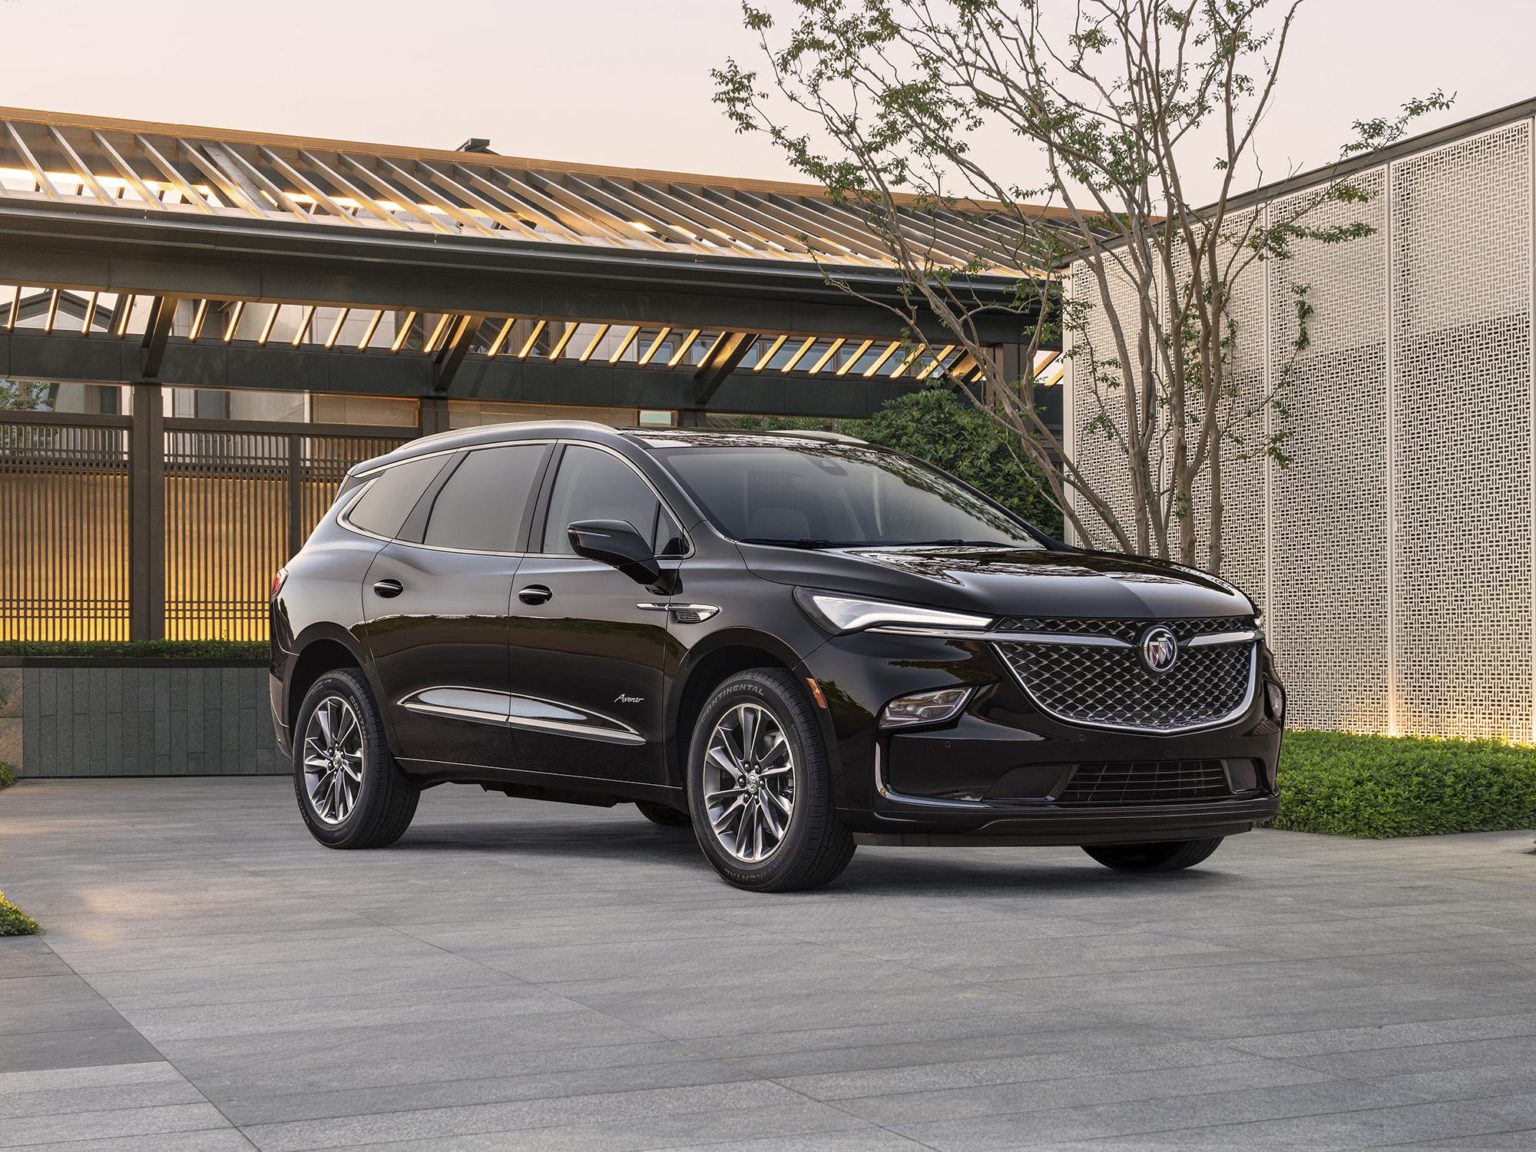 Buick has redesigned their flagship Enclave model for the 2022 model year.